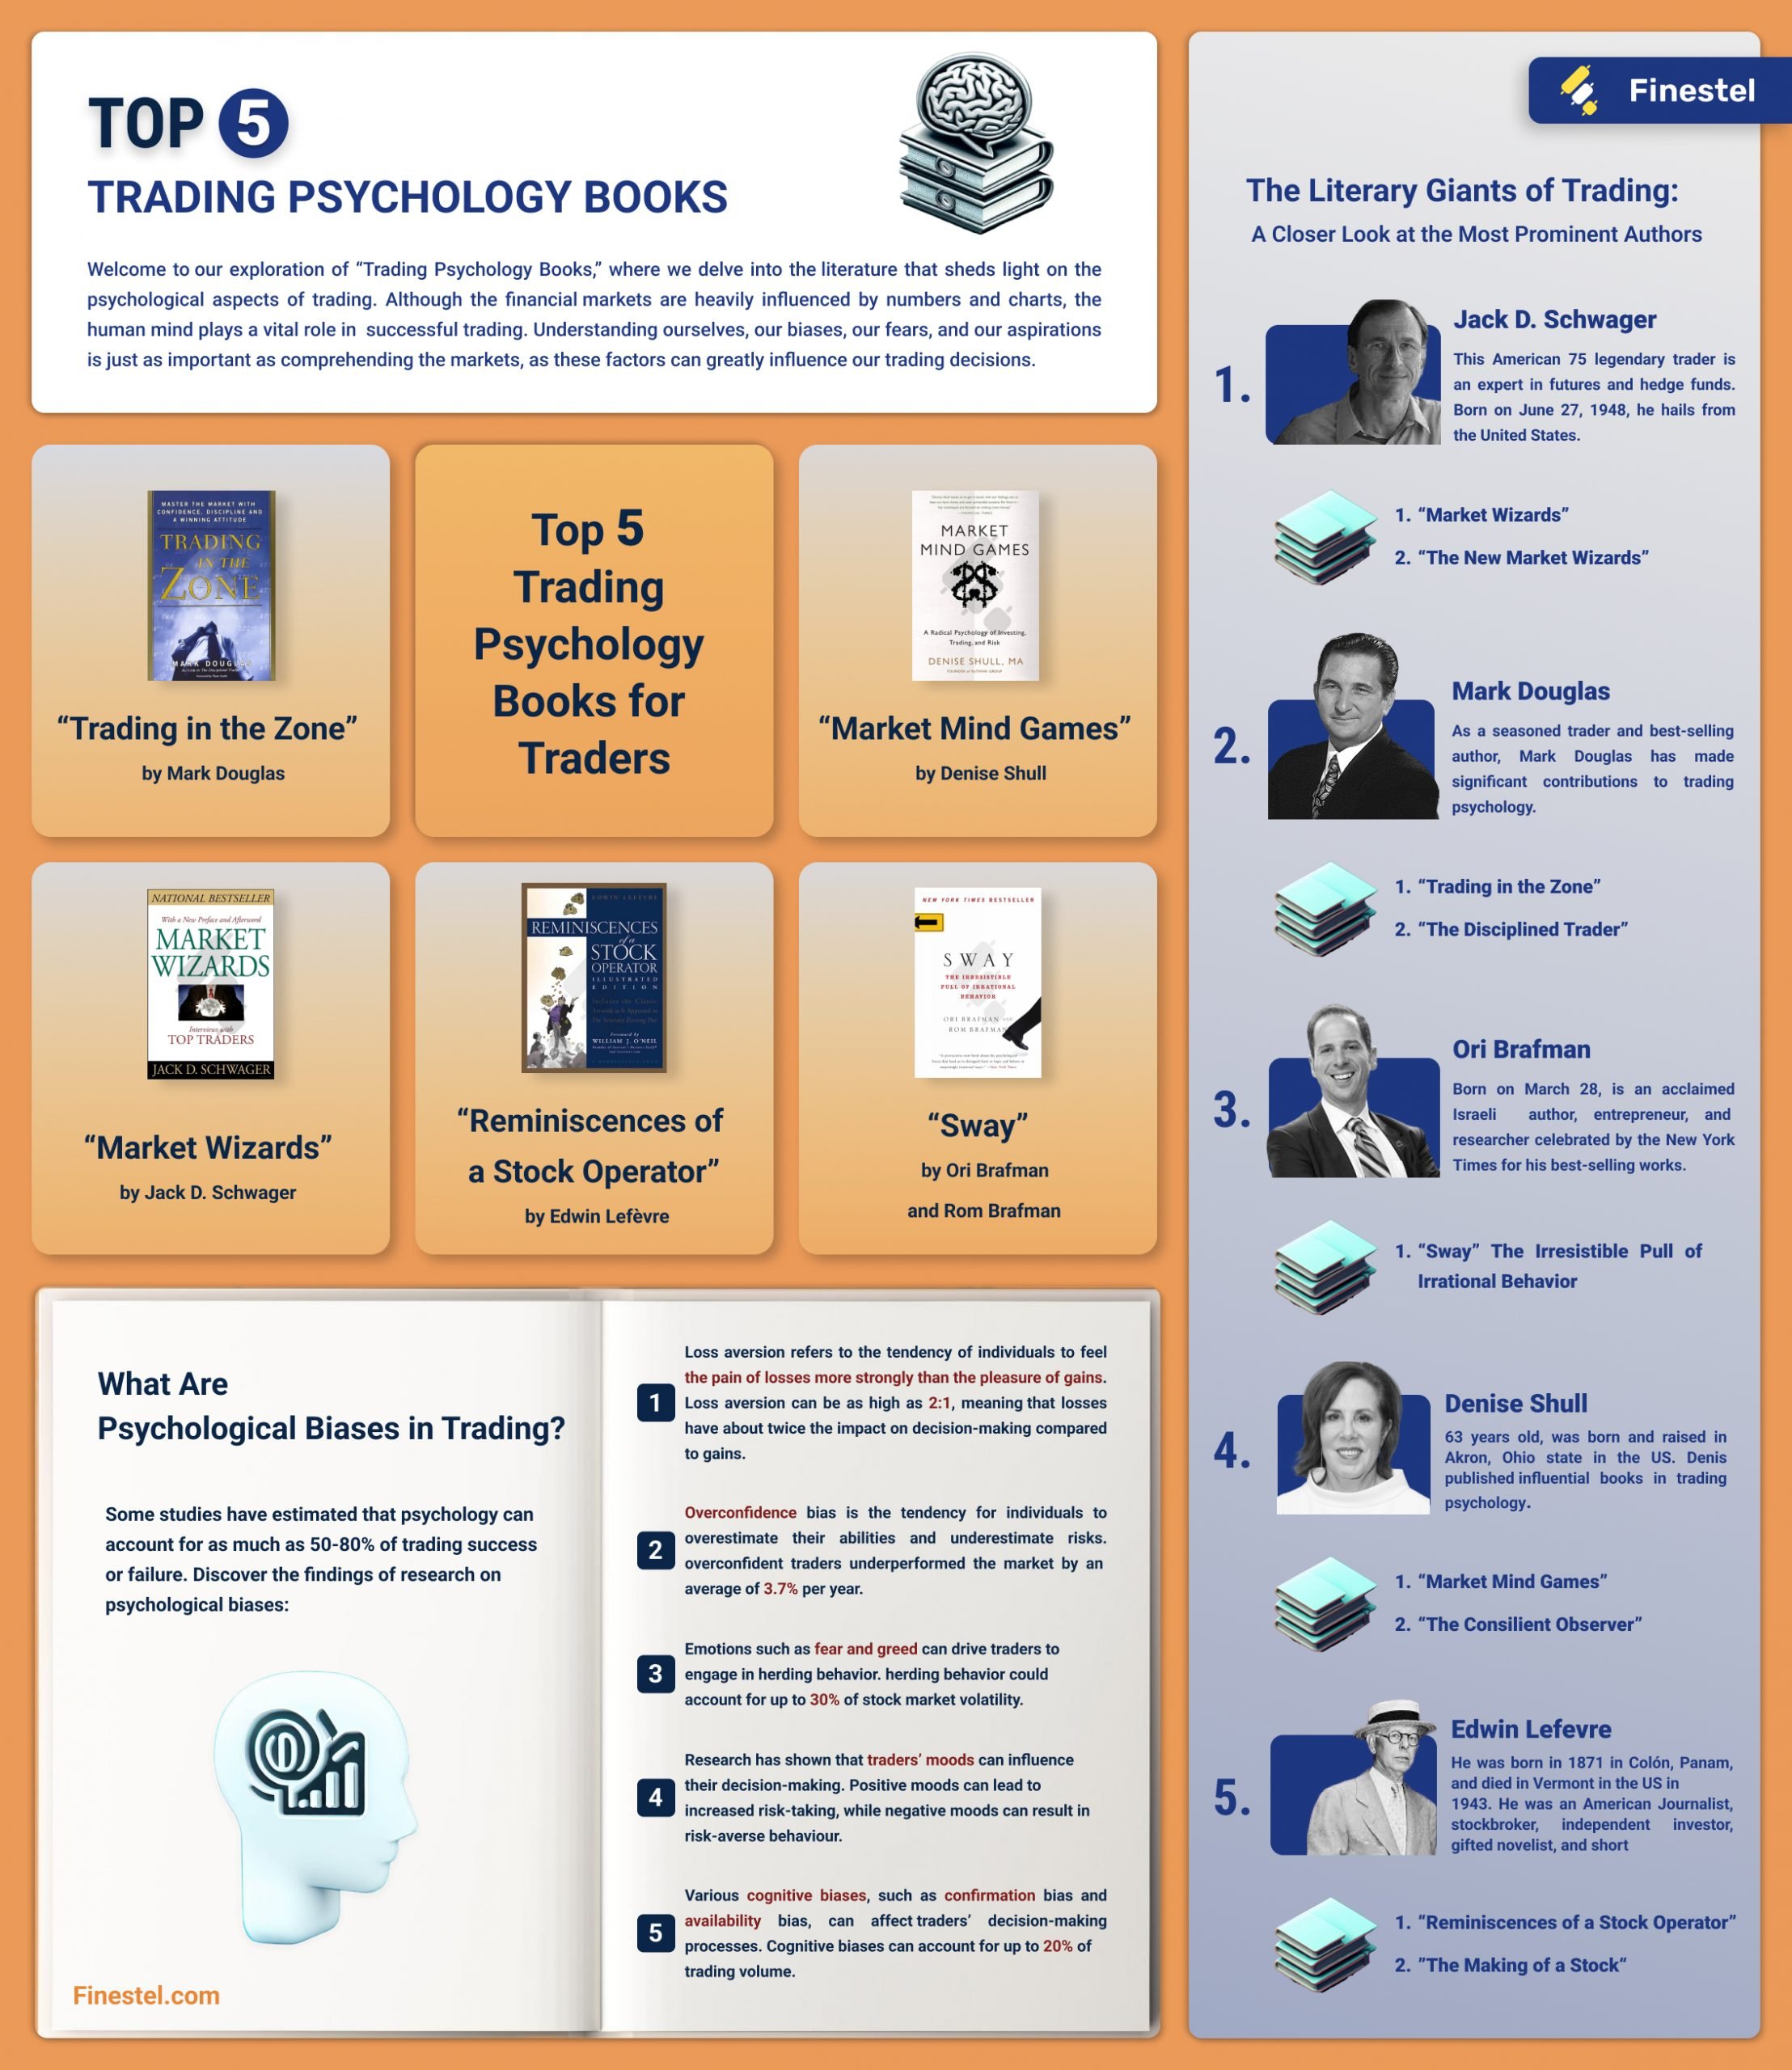 Top 5 Trading Psychology Books in an Infographic